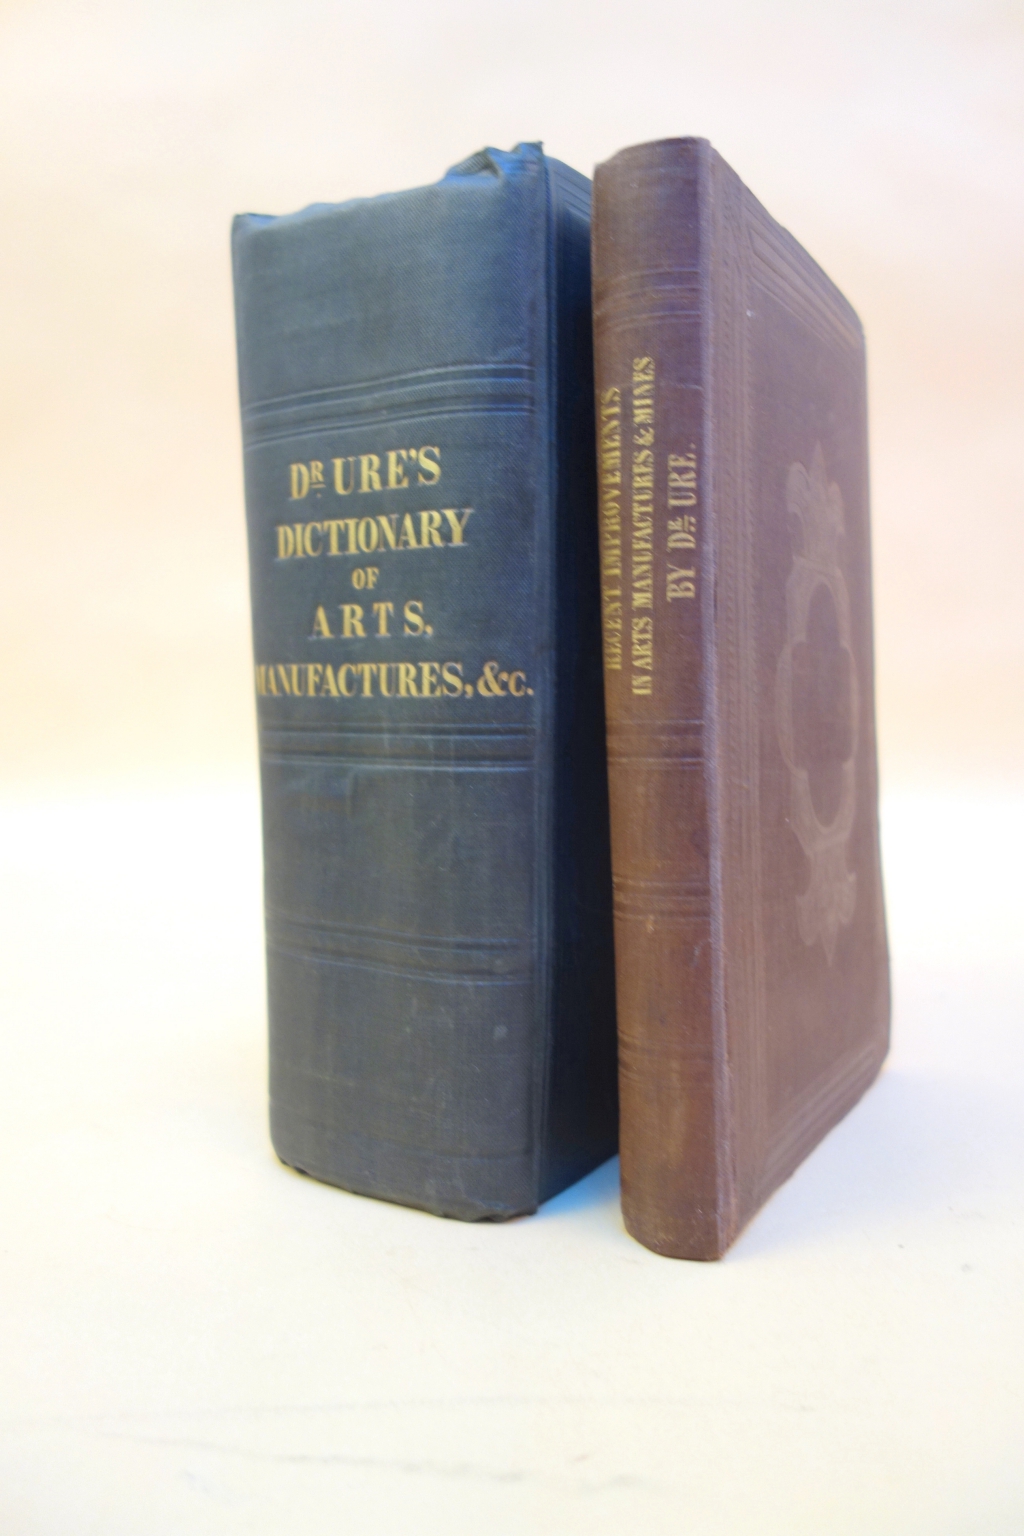 Ure's Dictionary and Supplement original cloth bindings